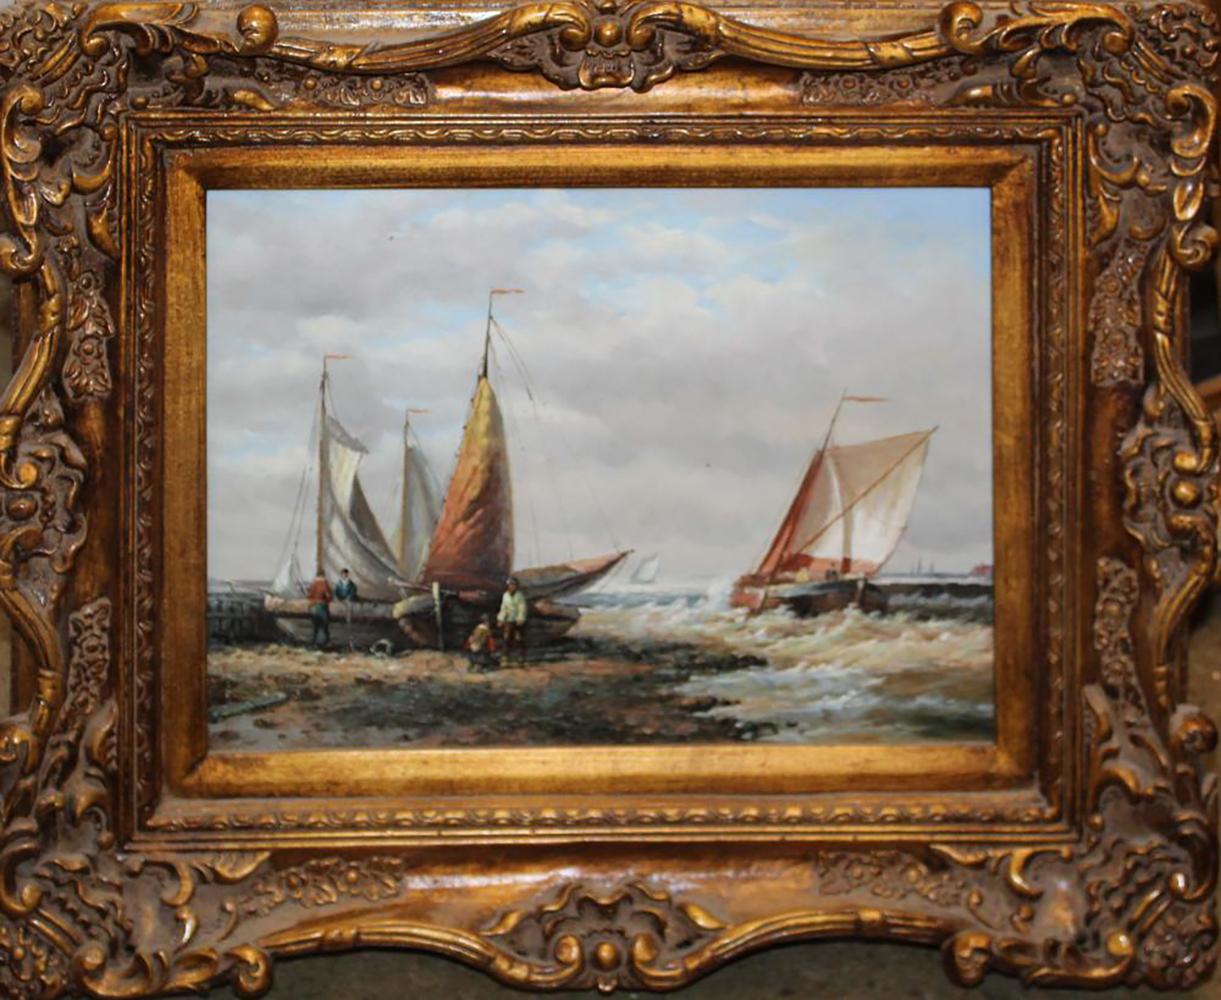 Unknown Landscape Painting - 19th c. English Marine Oil Painting - British School